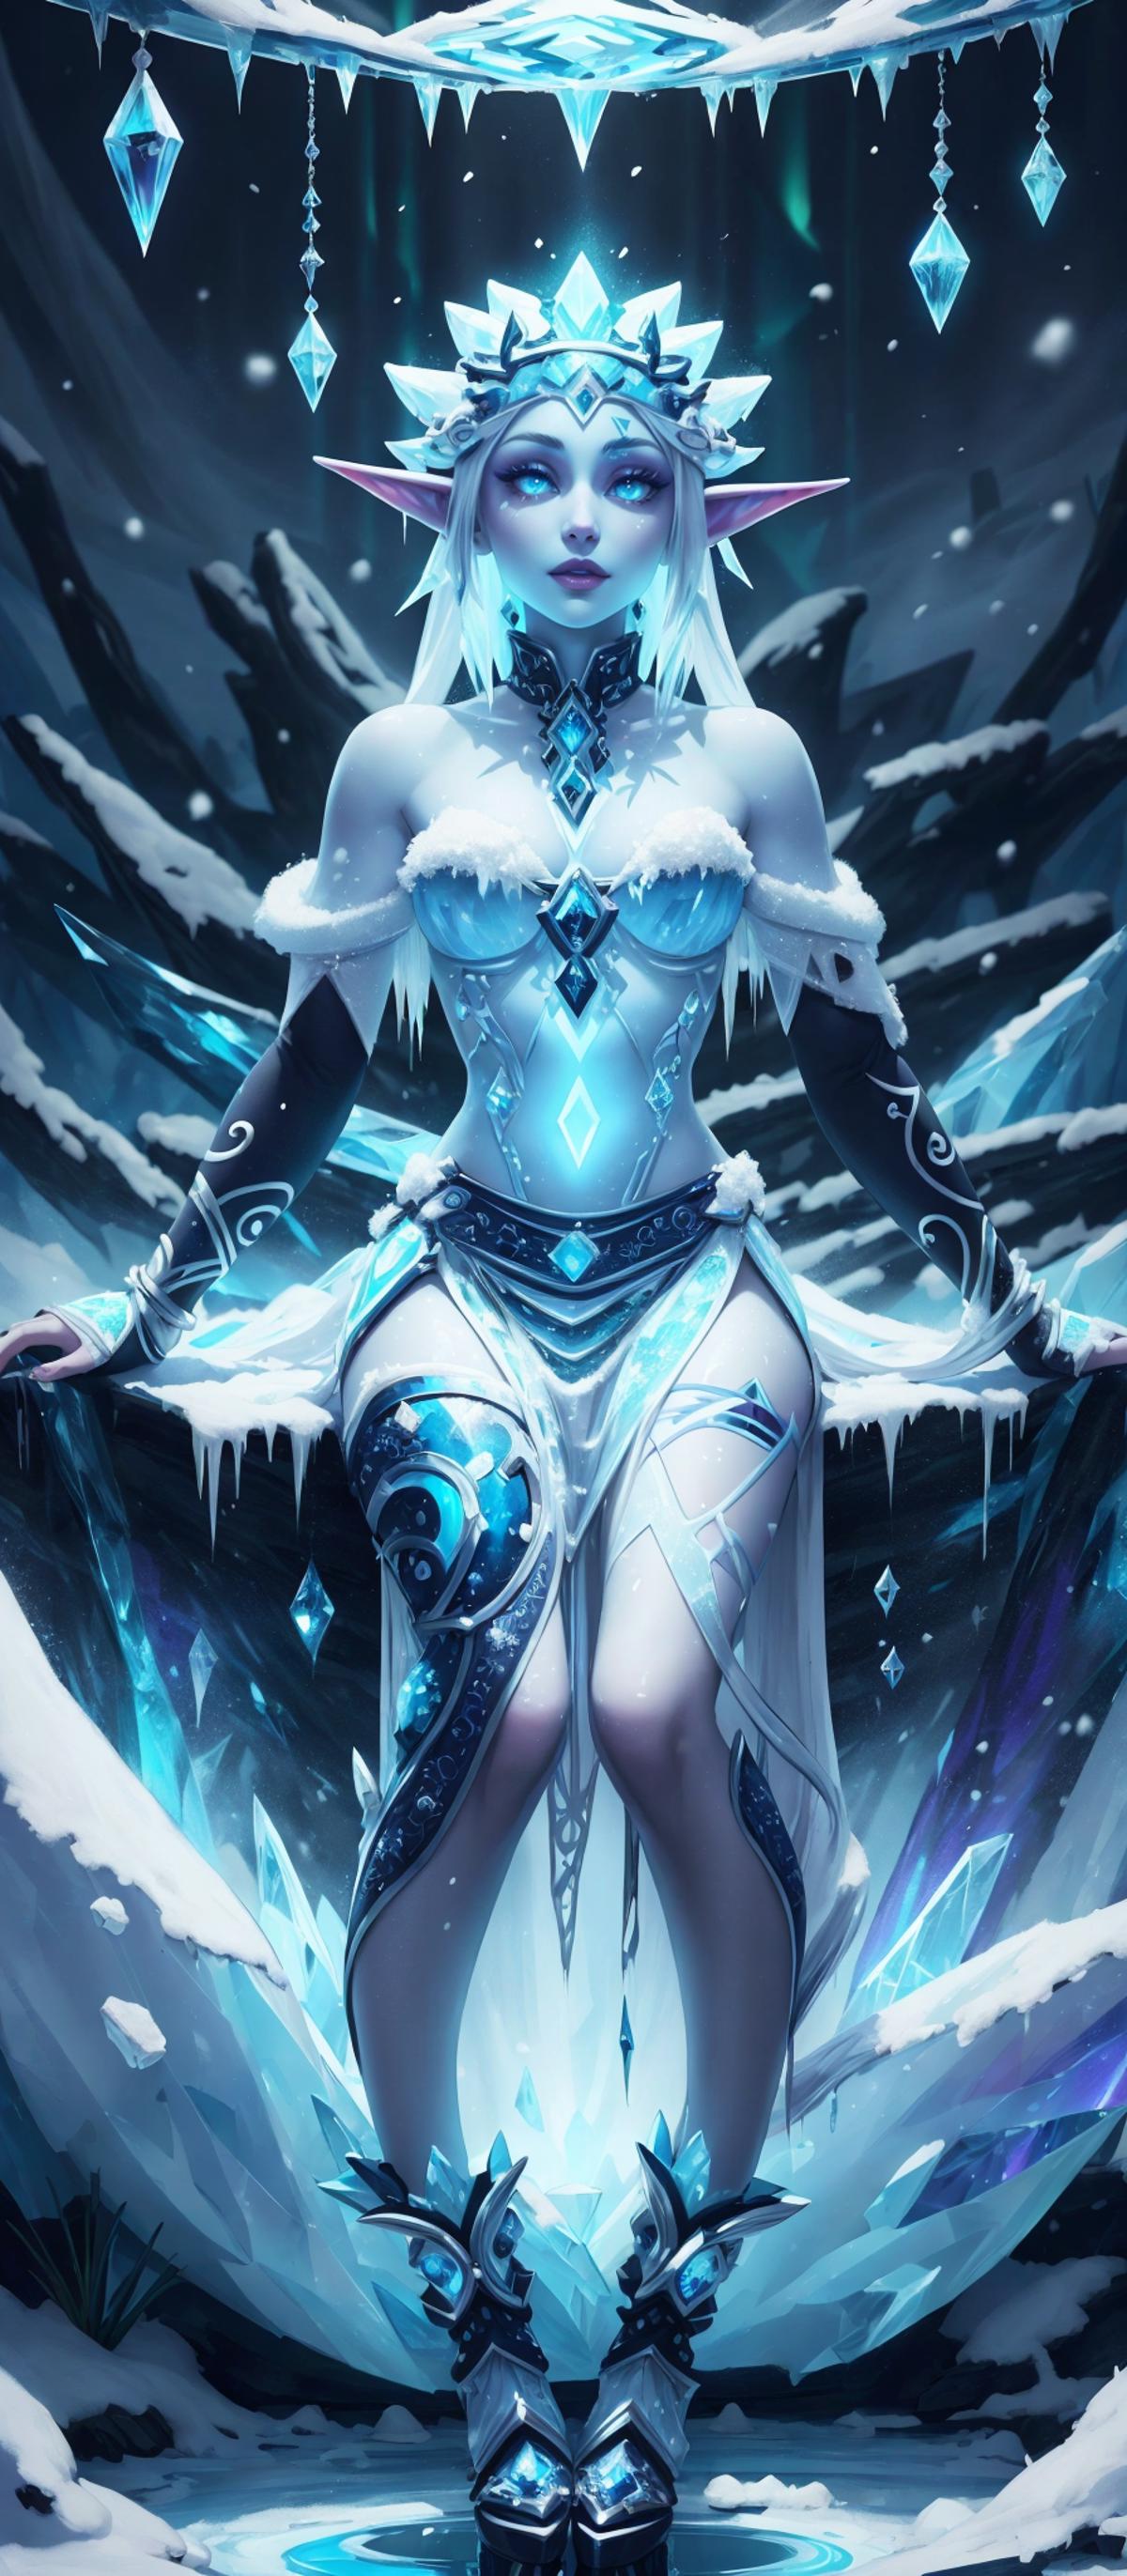 Frost Elf image by Magof